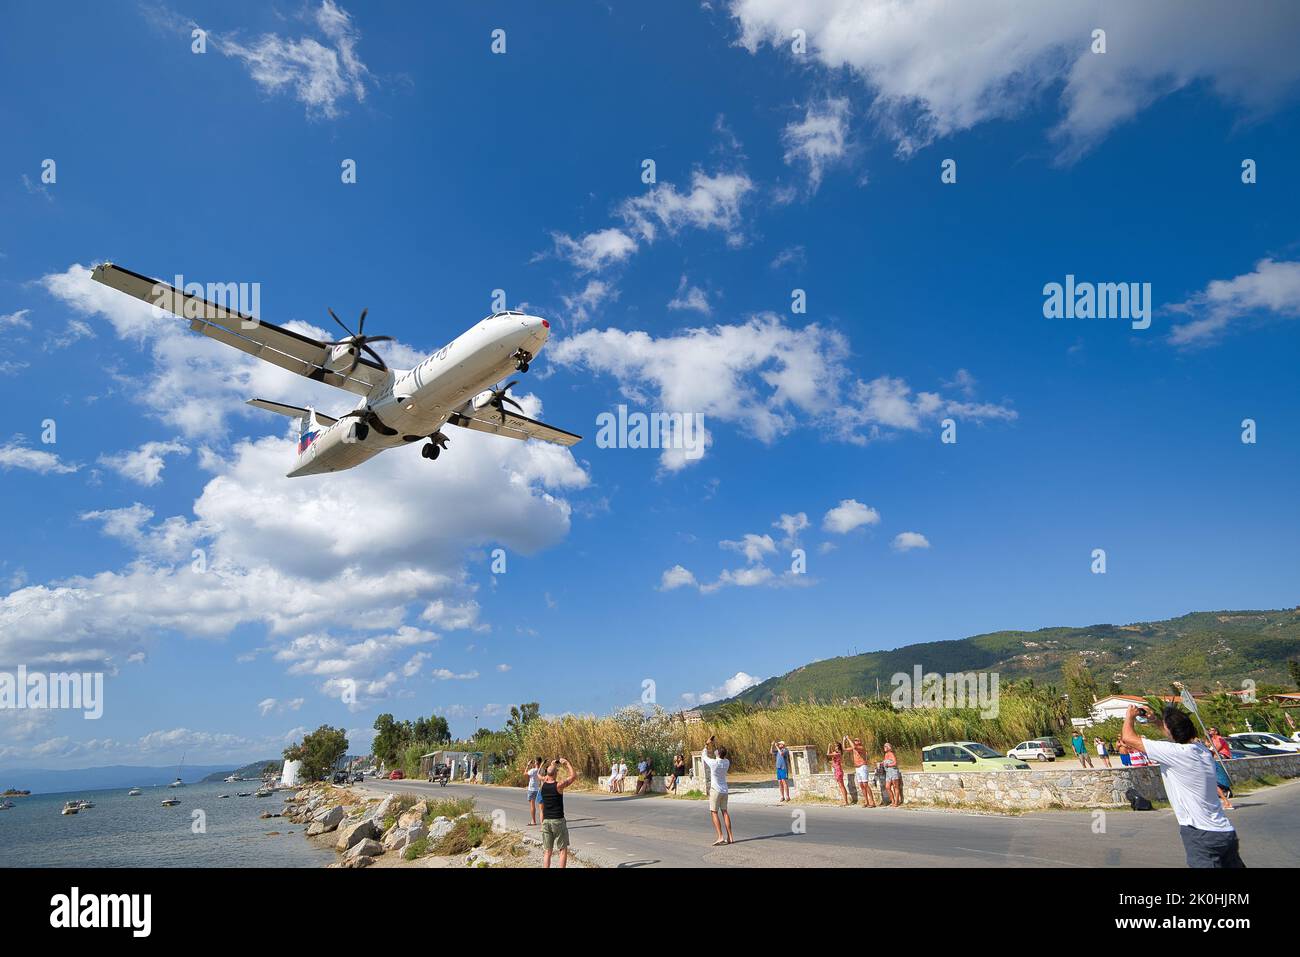 People taking photos of a low-flying airplane in Greece Stock Photo